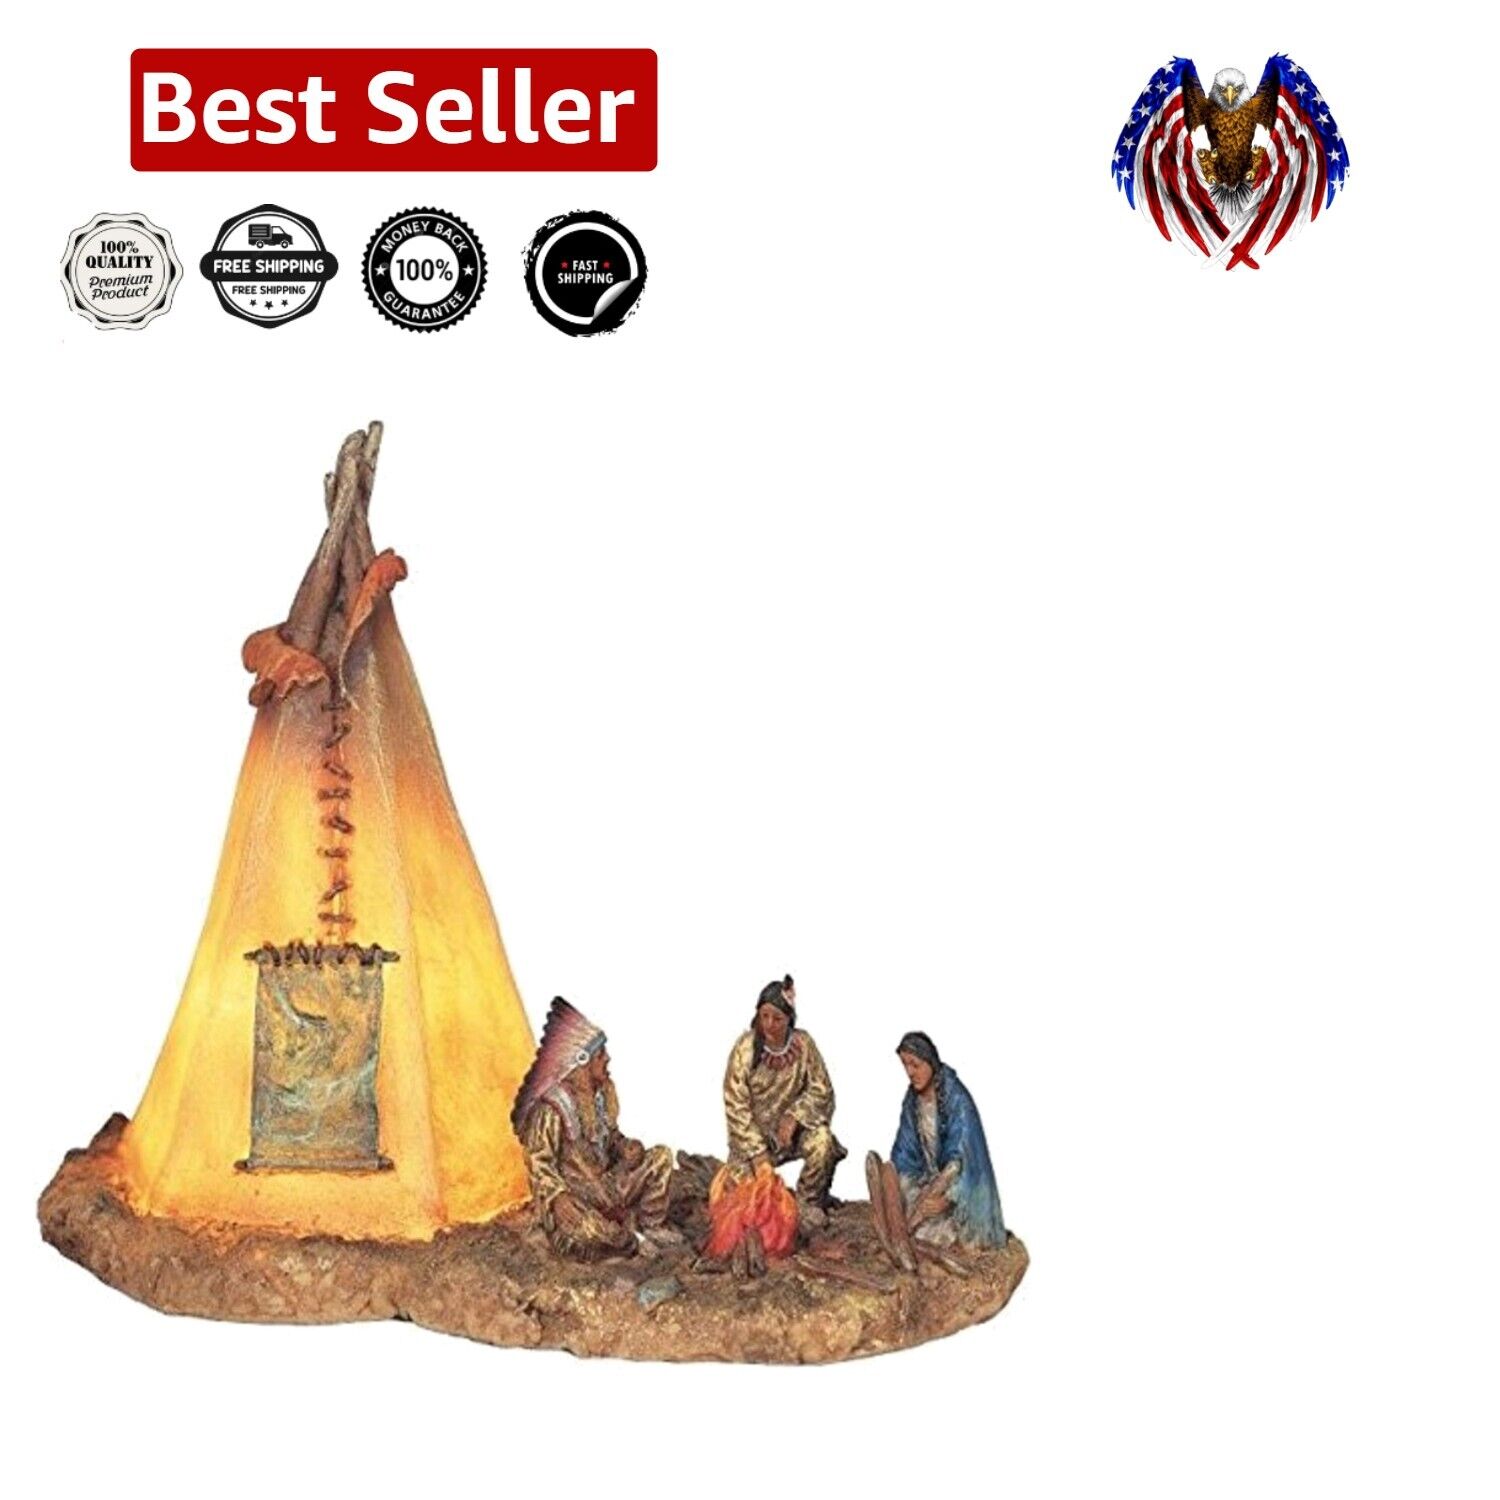 Premium Native American Decoration Statue with Battery-Operated Tipi Lighting